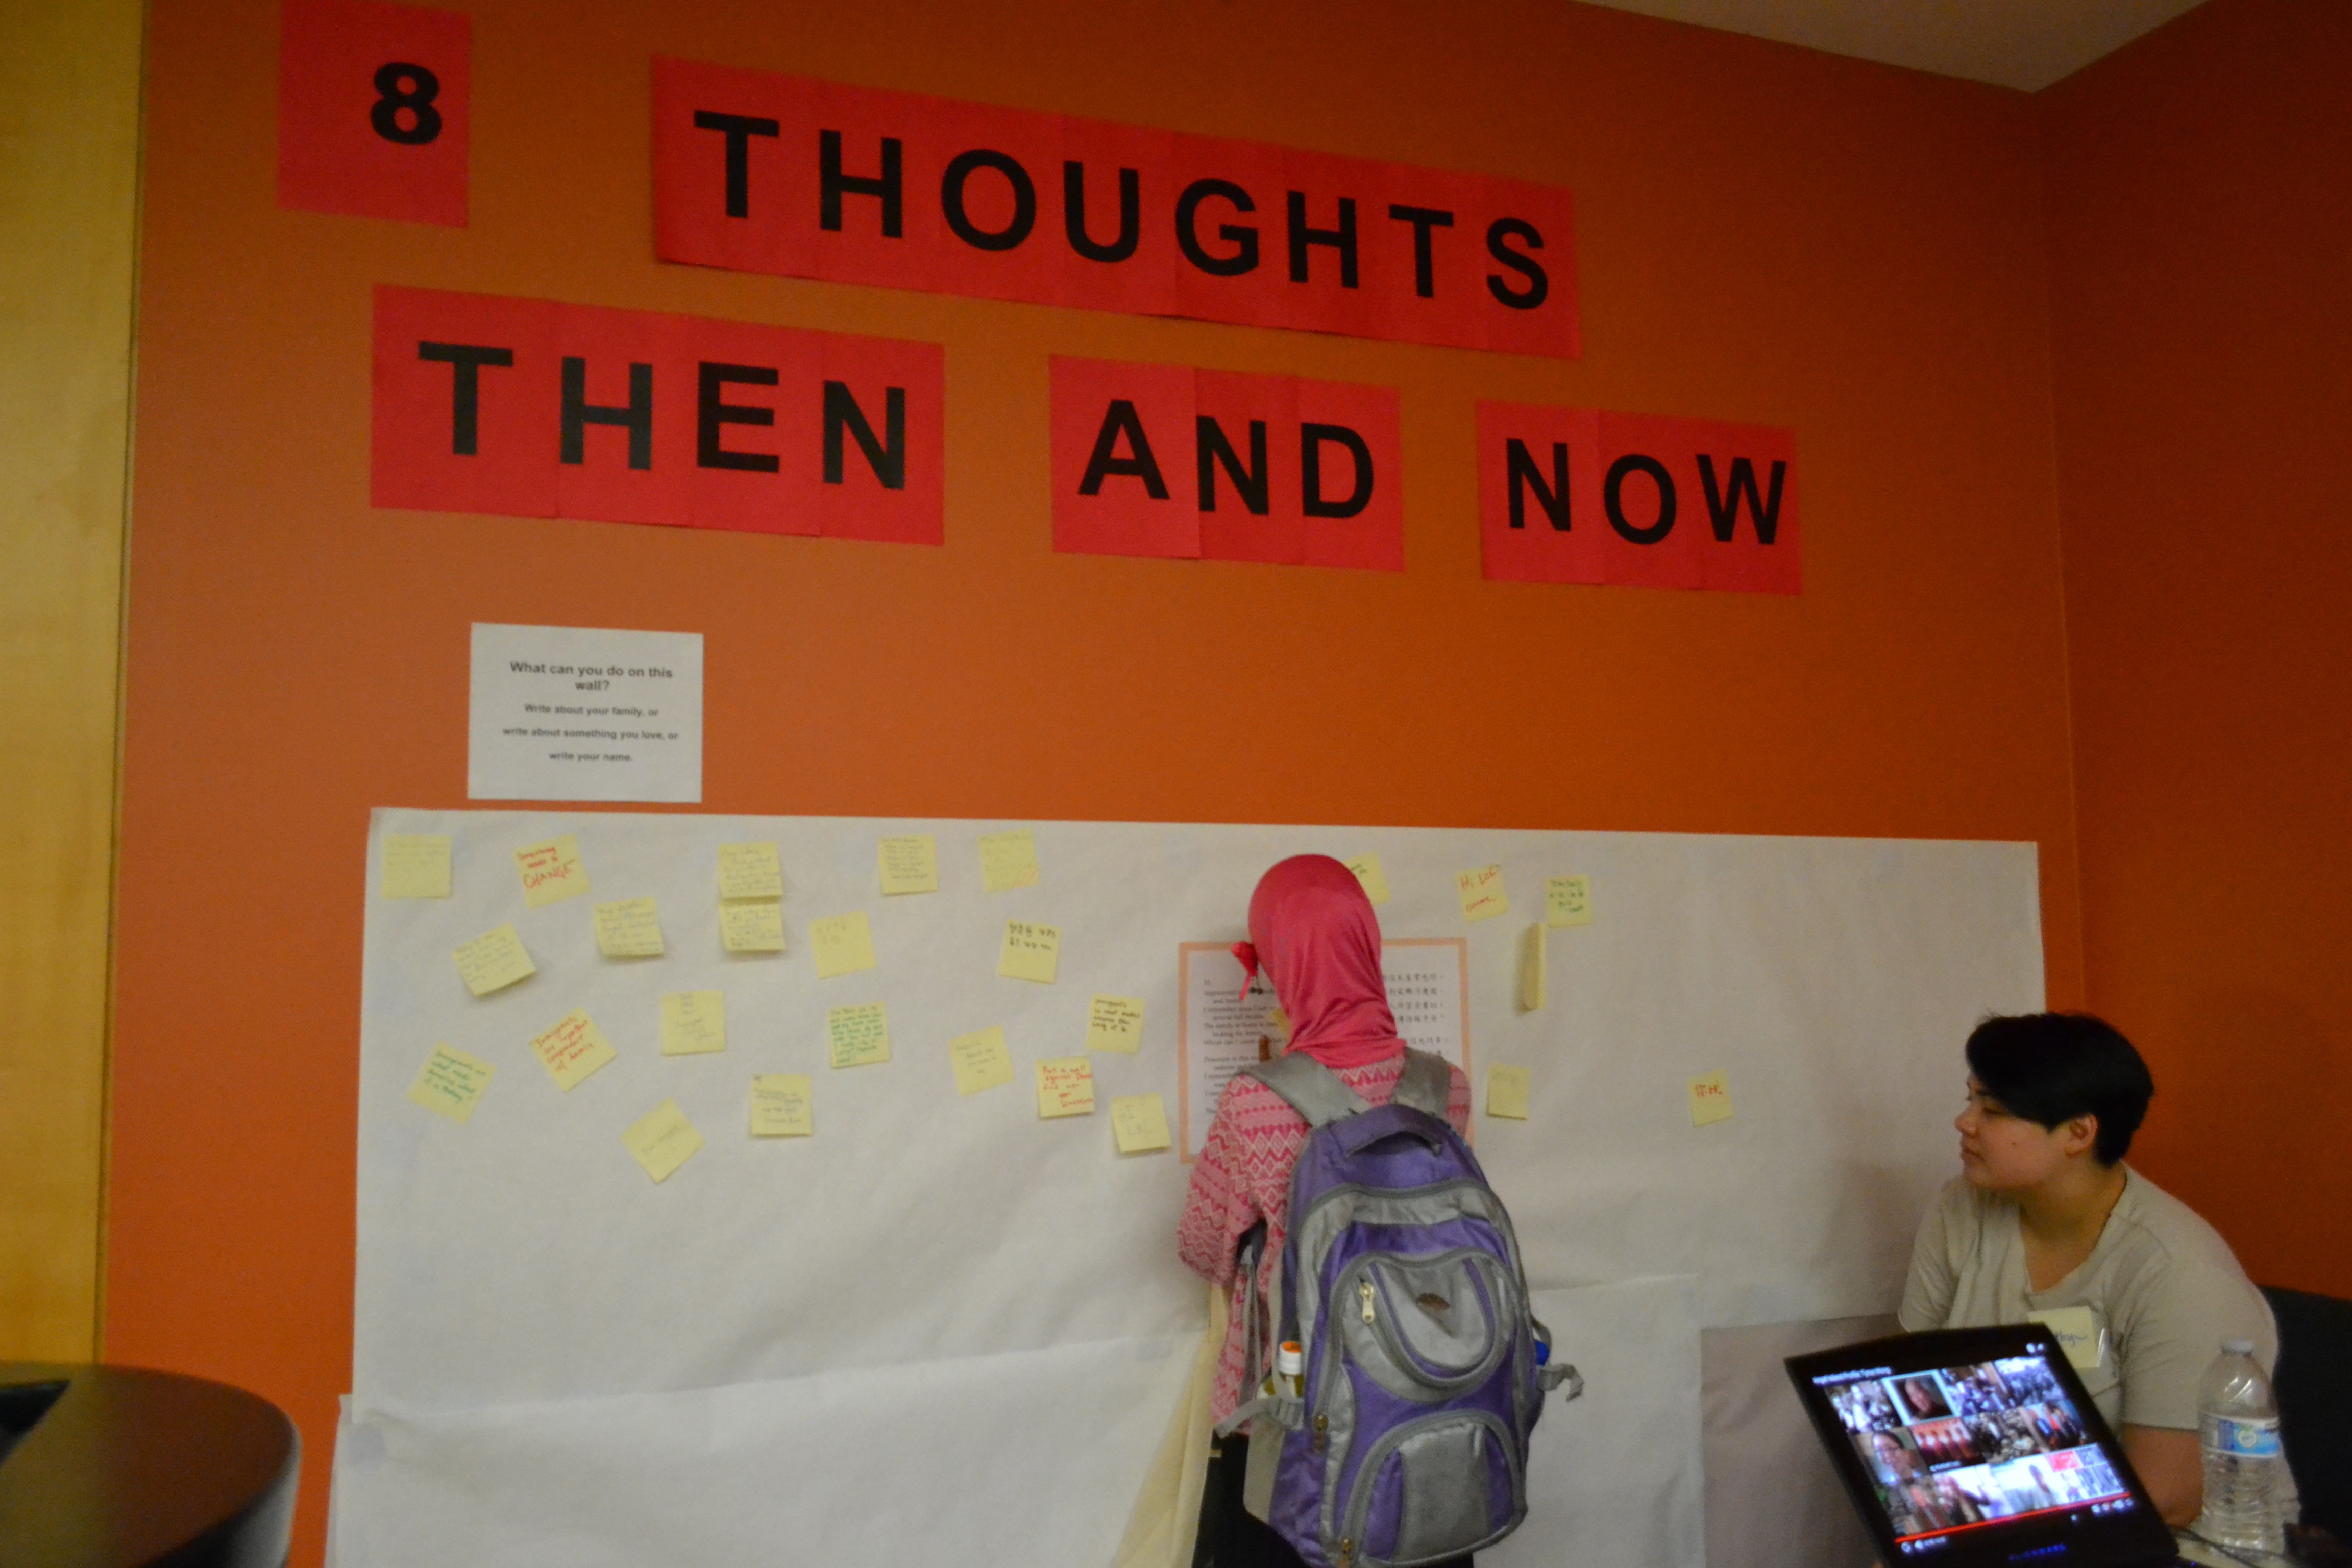 Thoughts then and now Wall exhibit